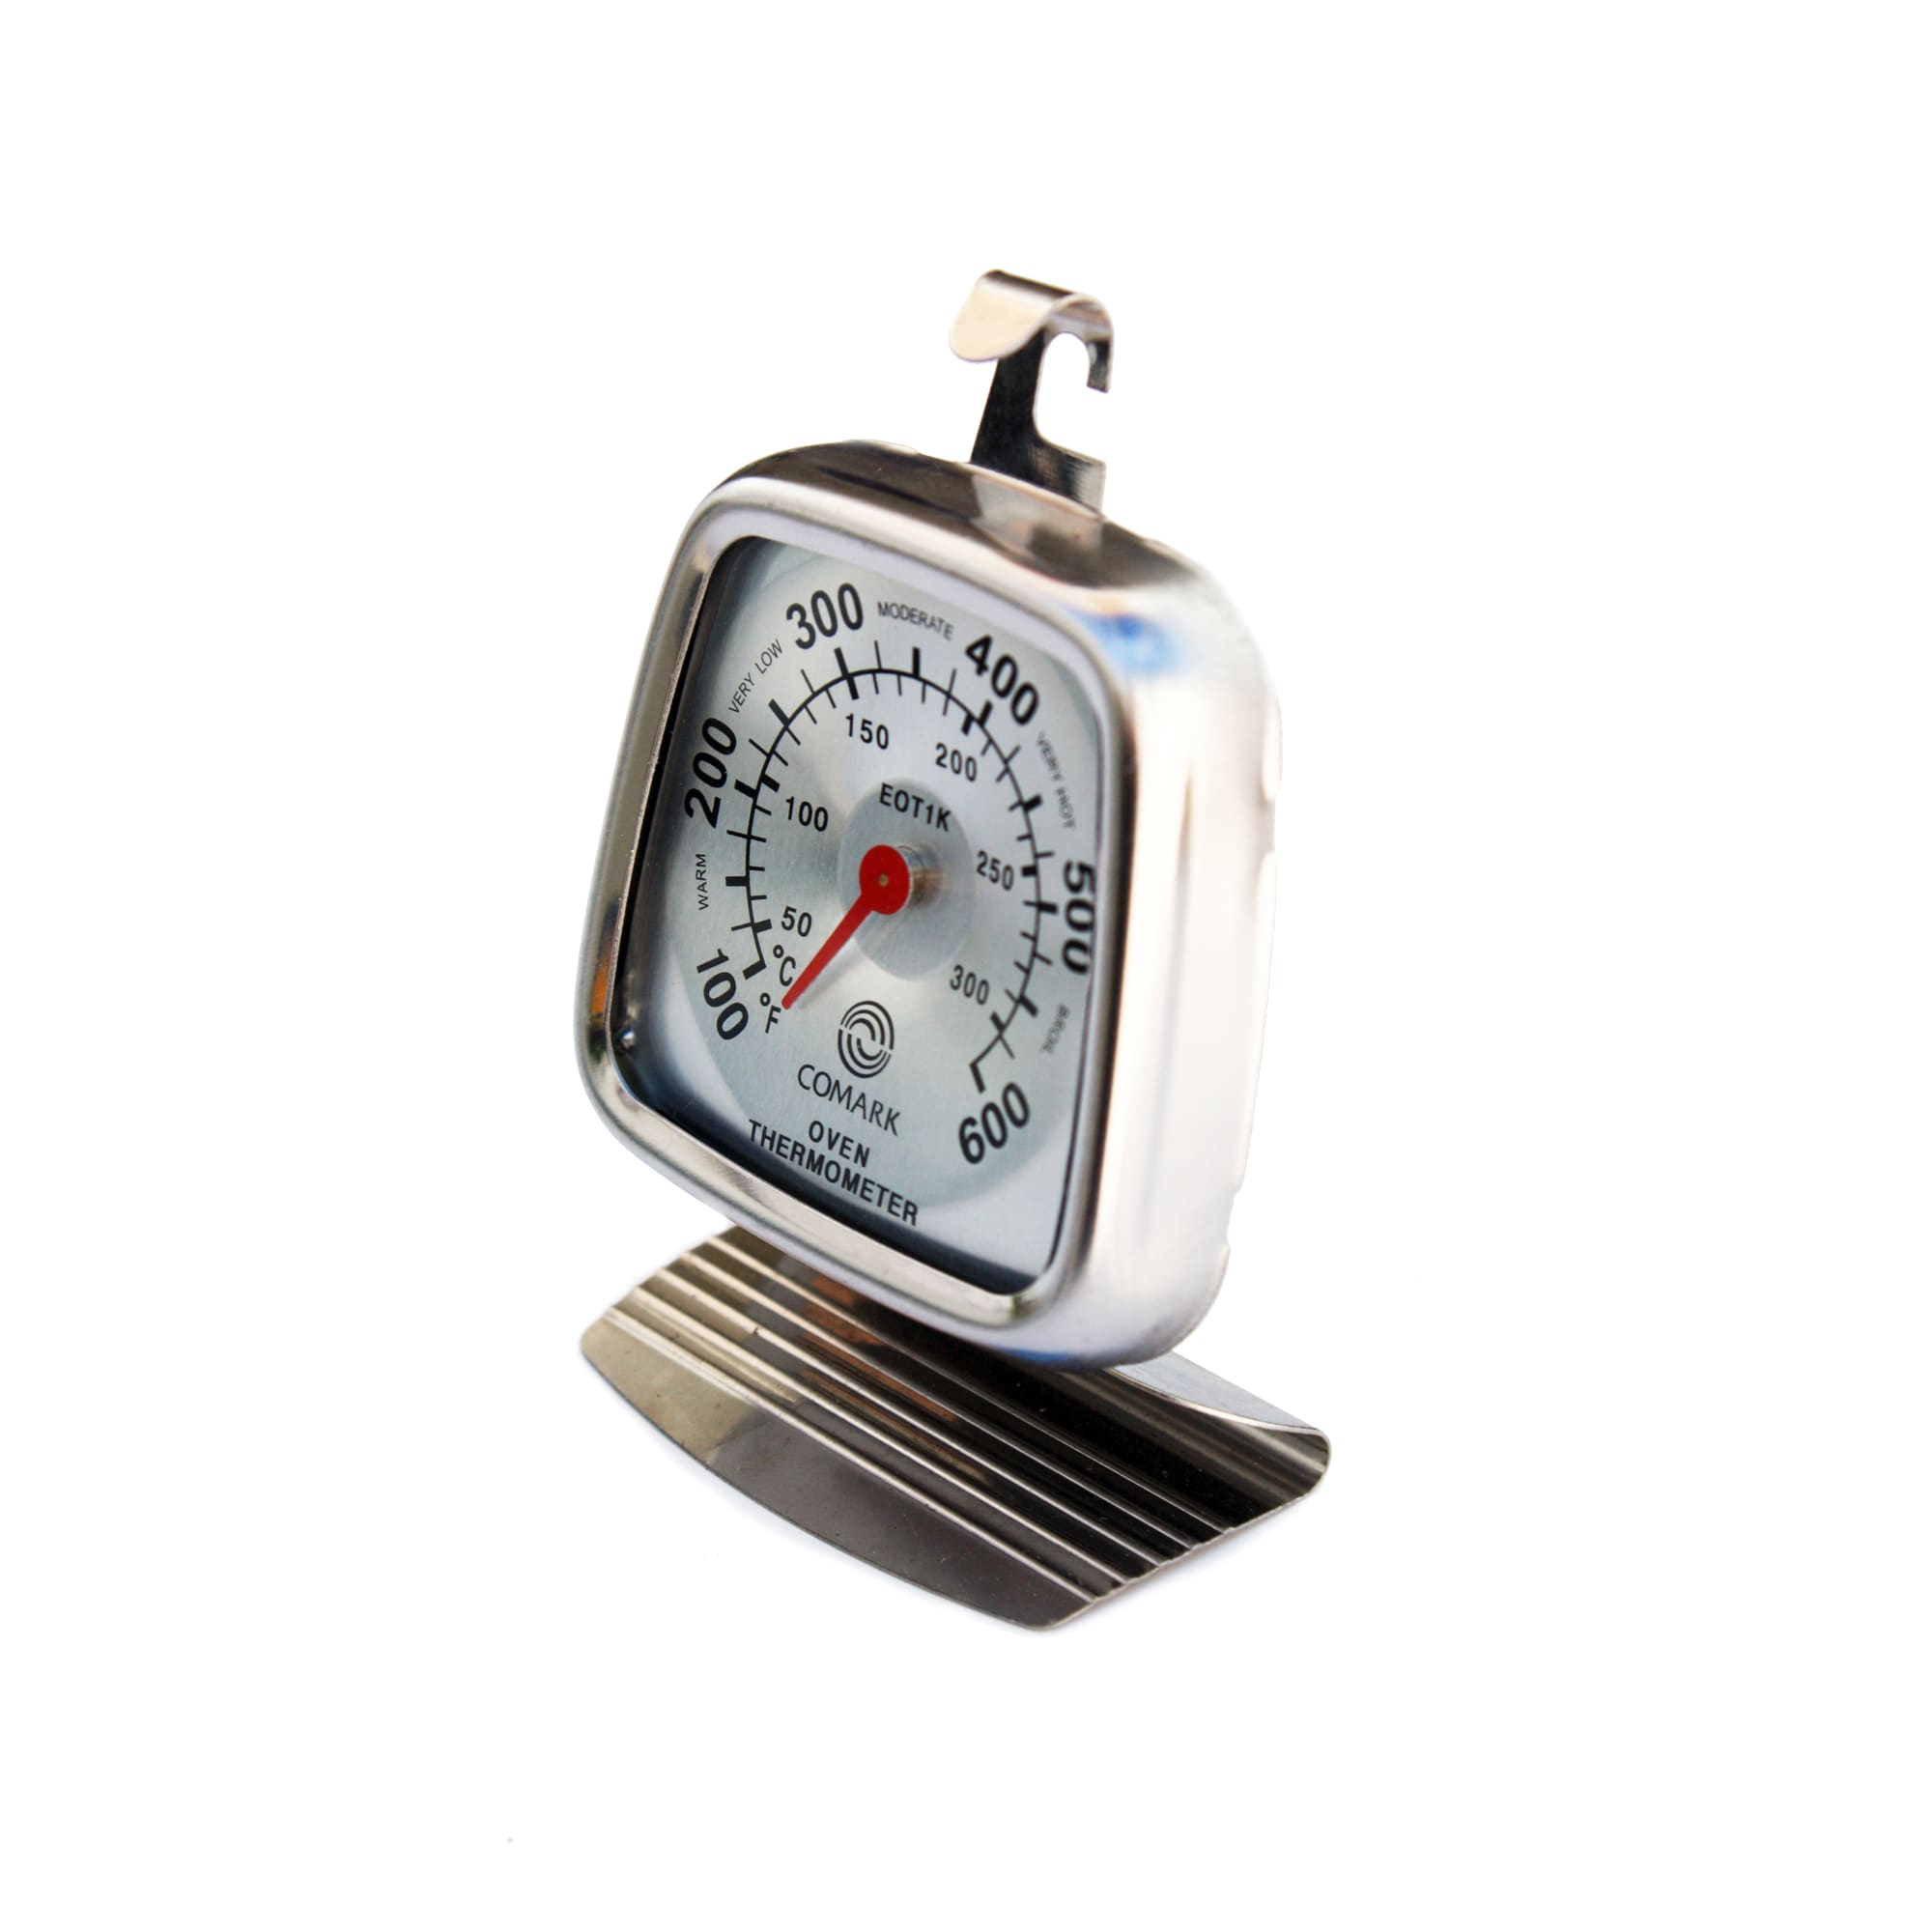 Comark EOT1K Economy Oven Thermometer - image 2 of 4